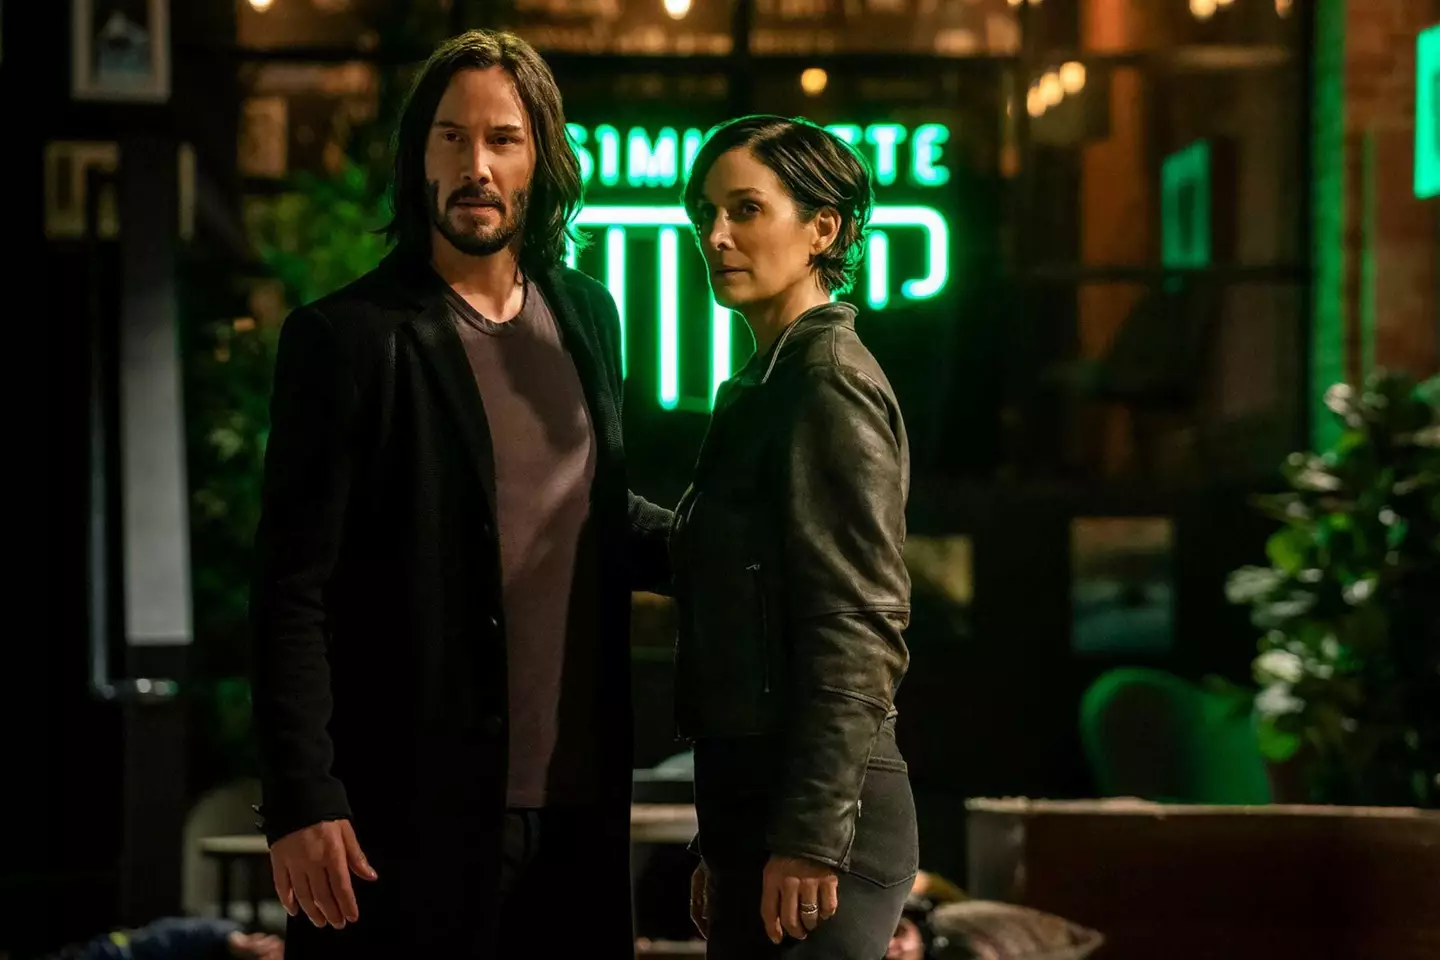 Keanu Reeves and Carrie-Anne Moss in The Matrix Resurrections.